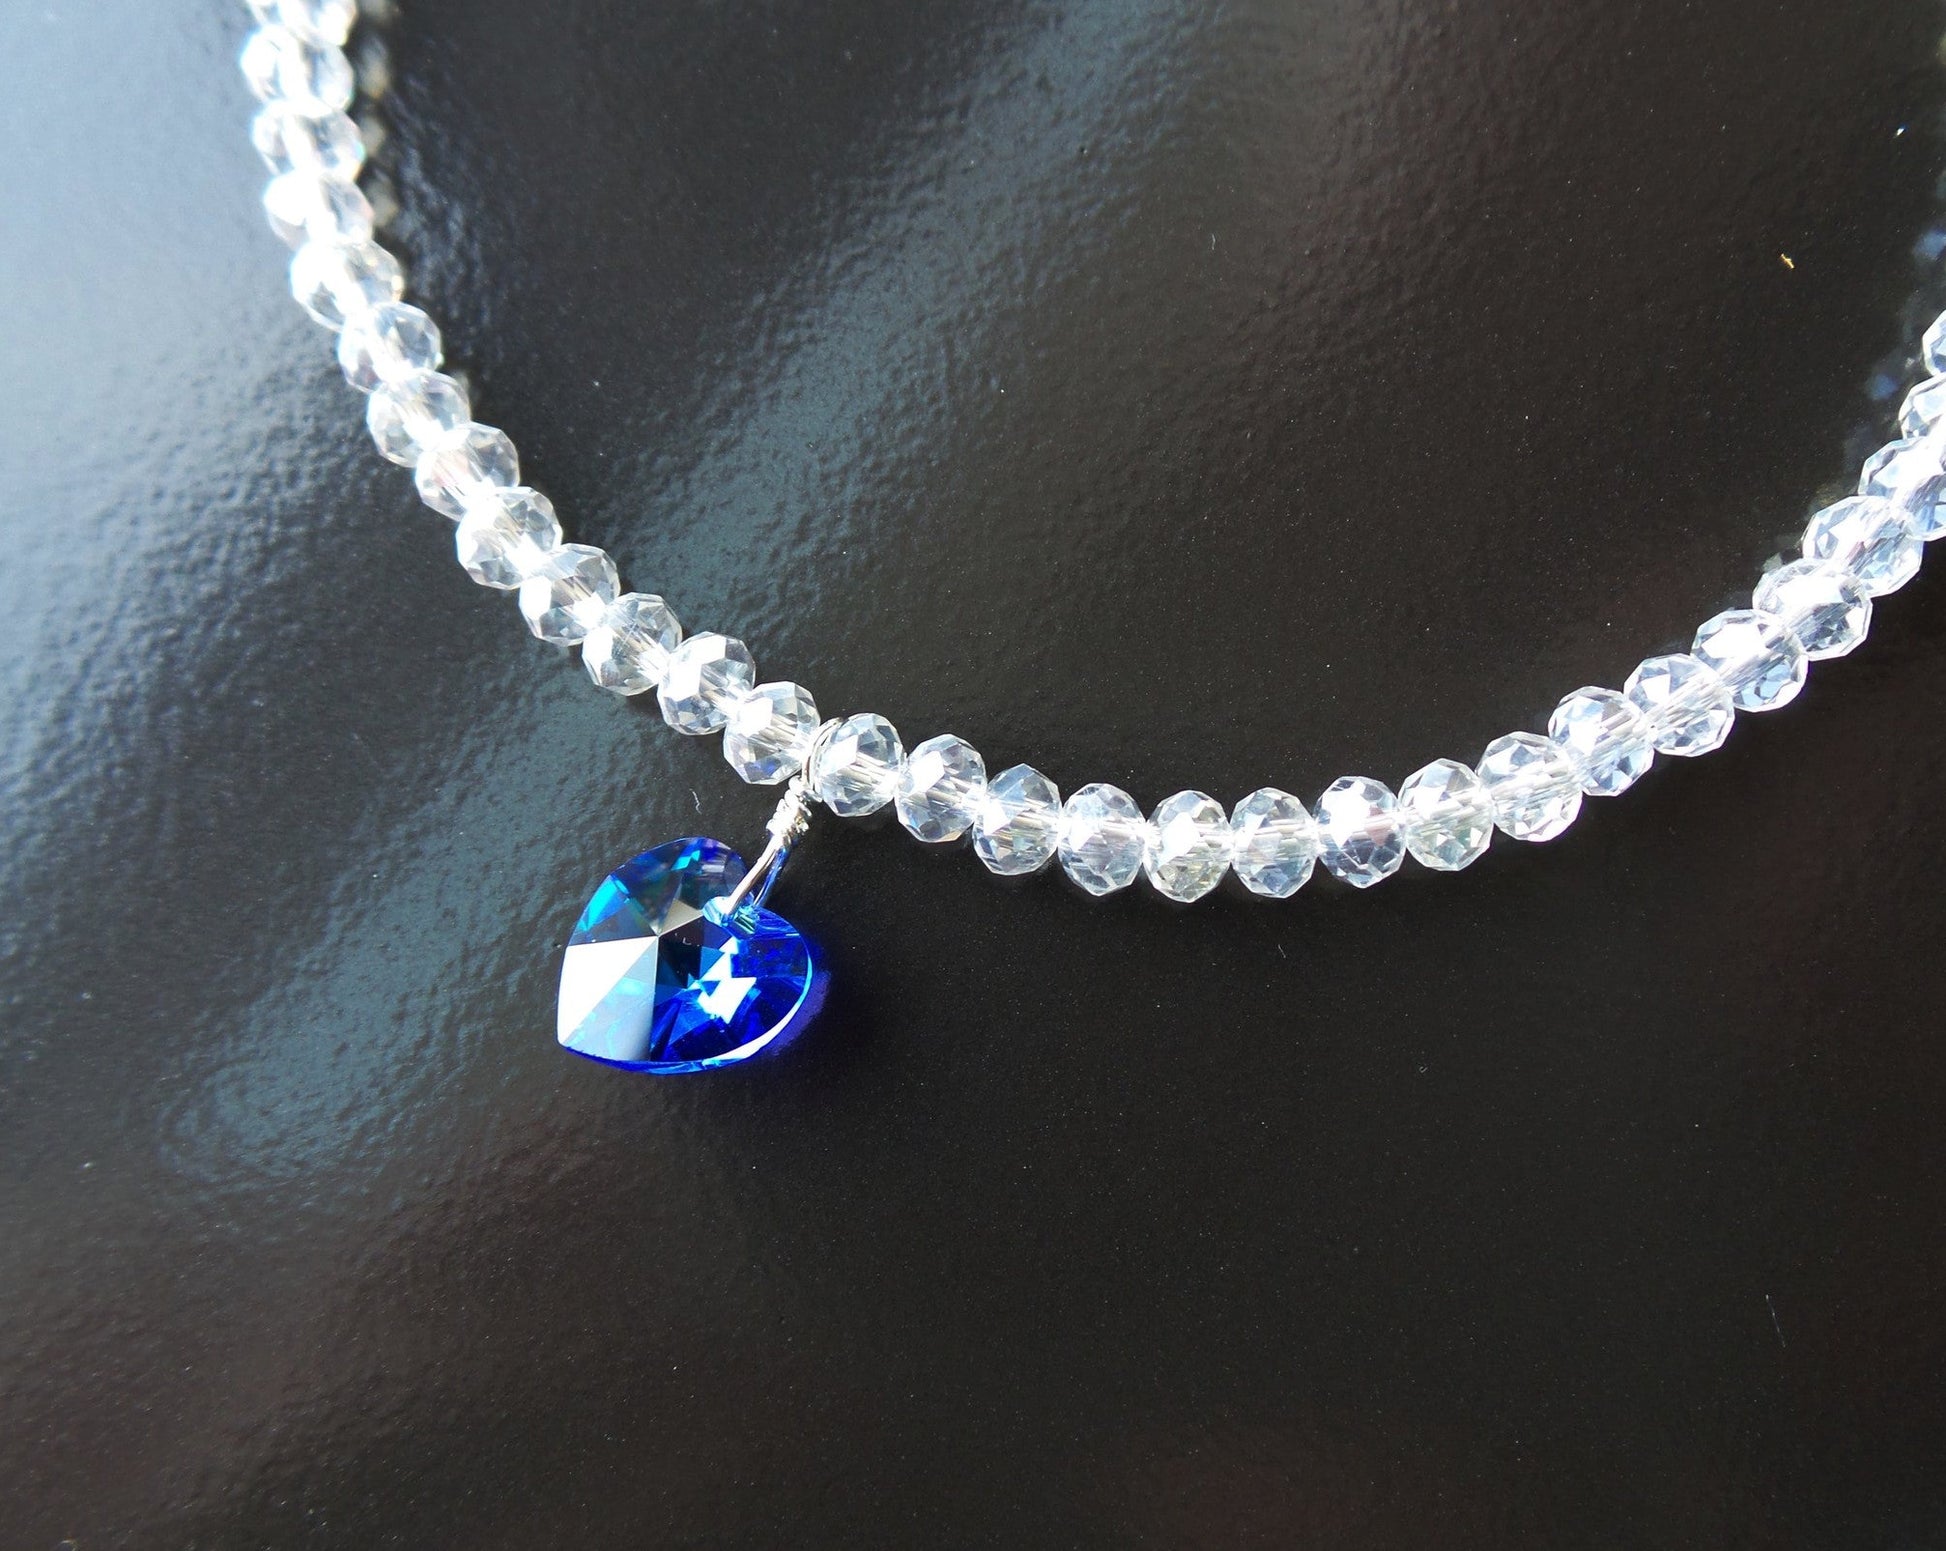 Something Blue Crystal Heart Beaded Ankle Bracelet, a Blue Crystal Heart dangling from clear Ab crystal beads, finished with Sterling Silver 